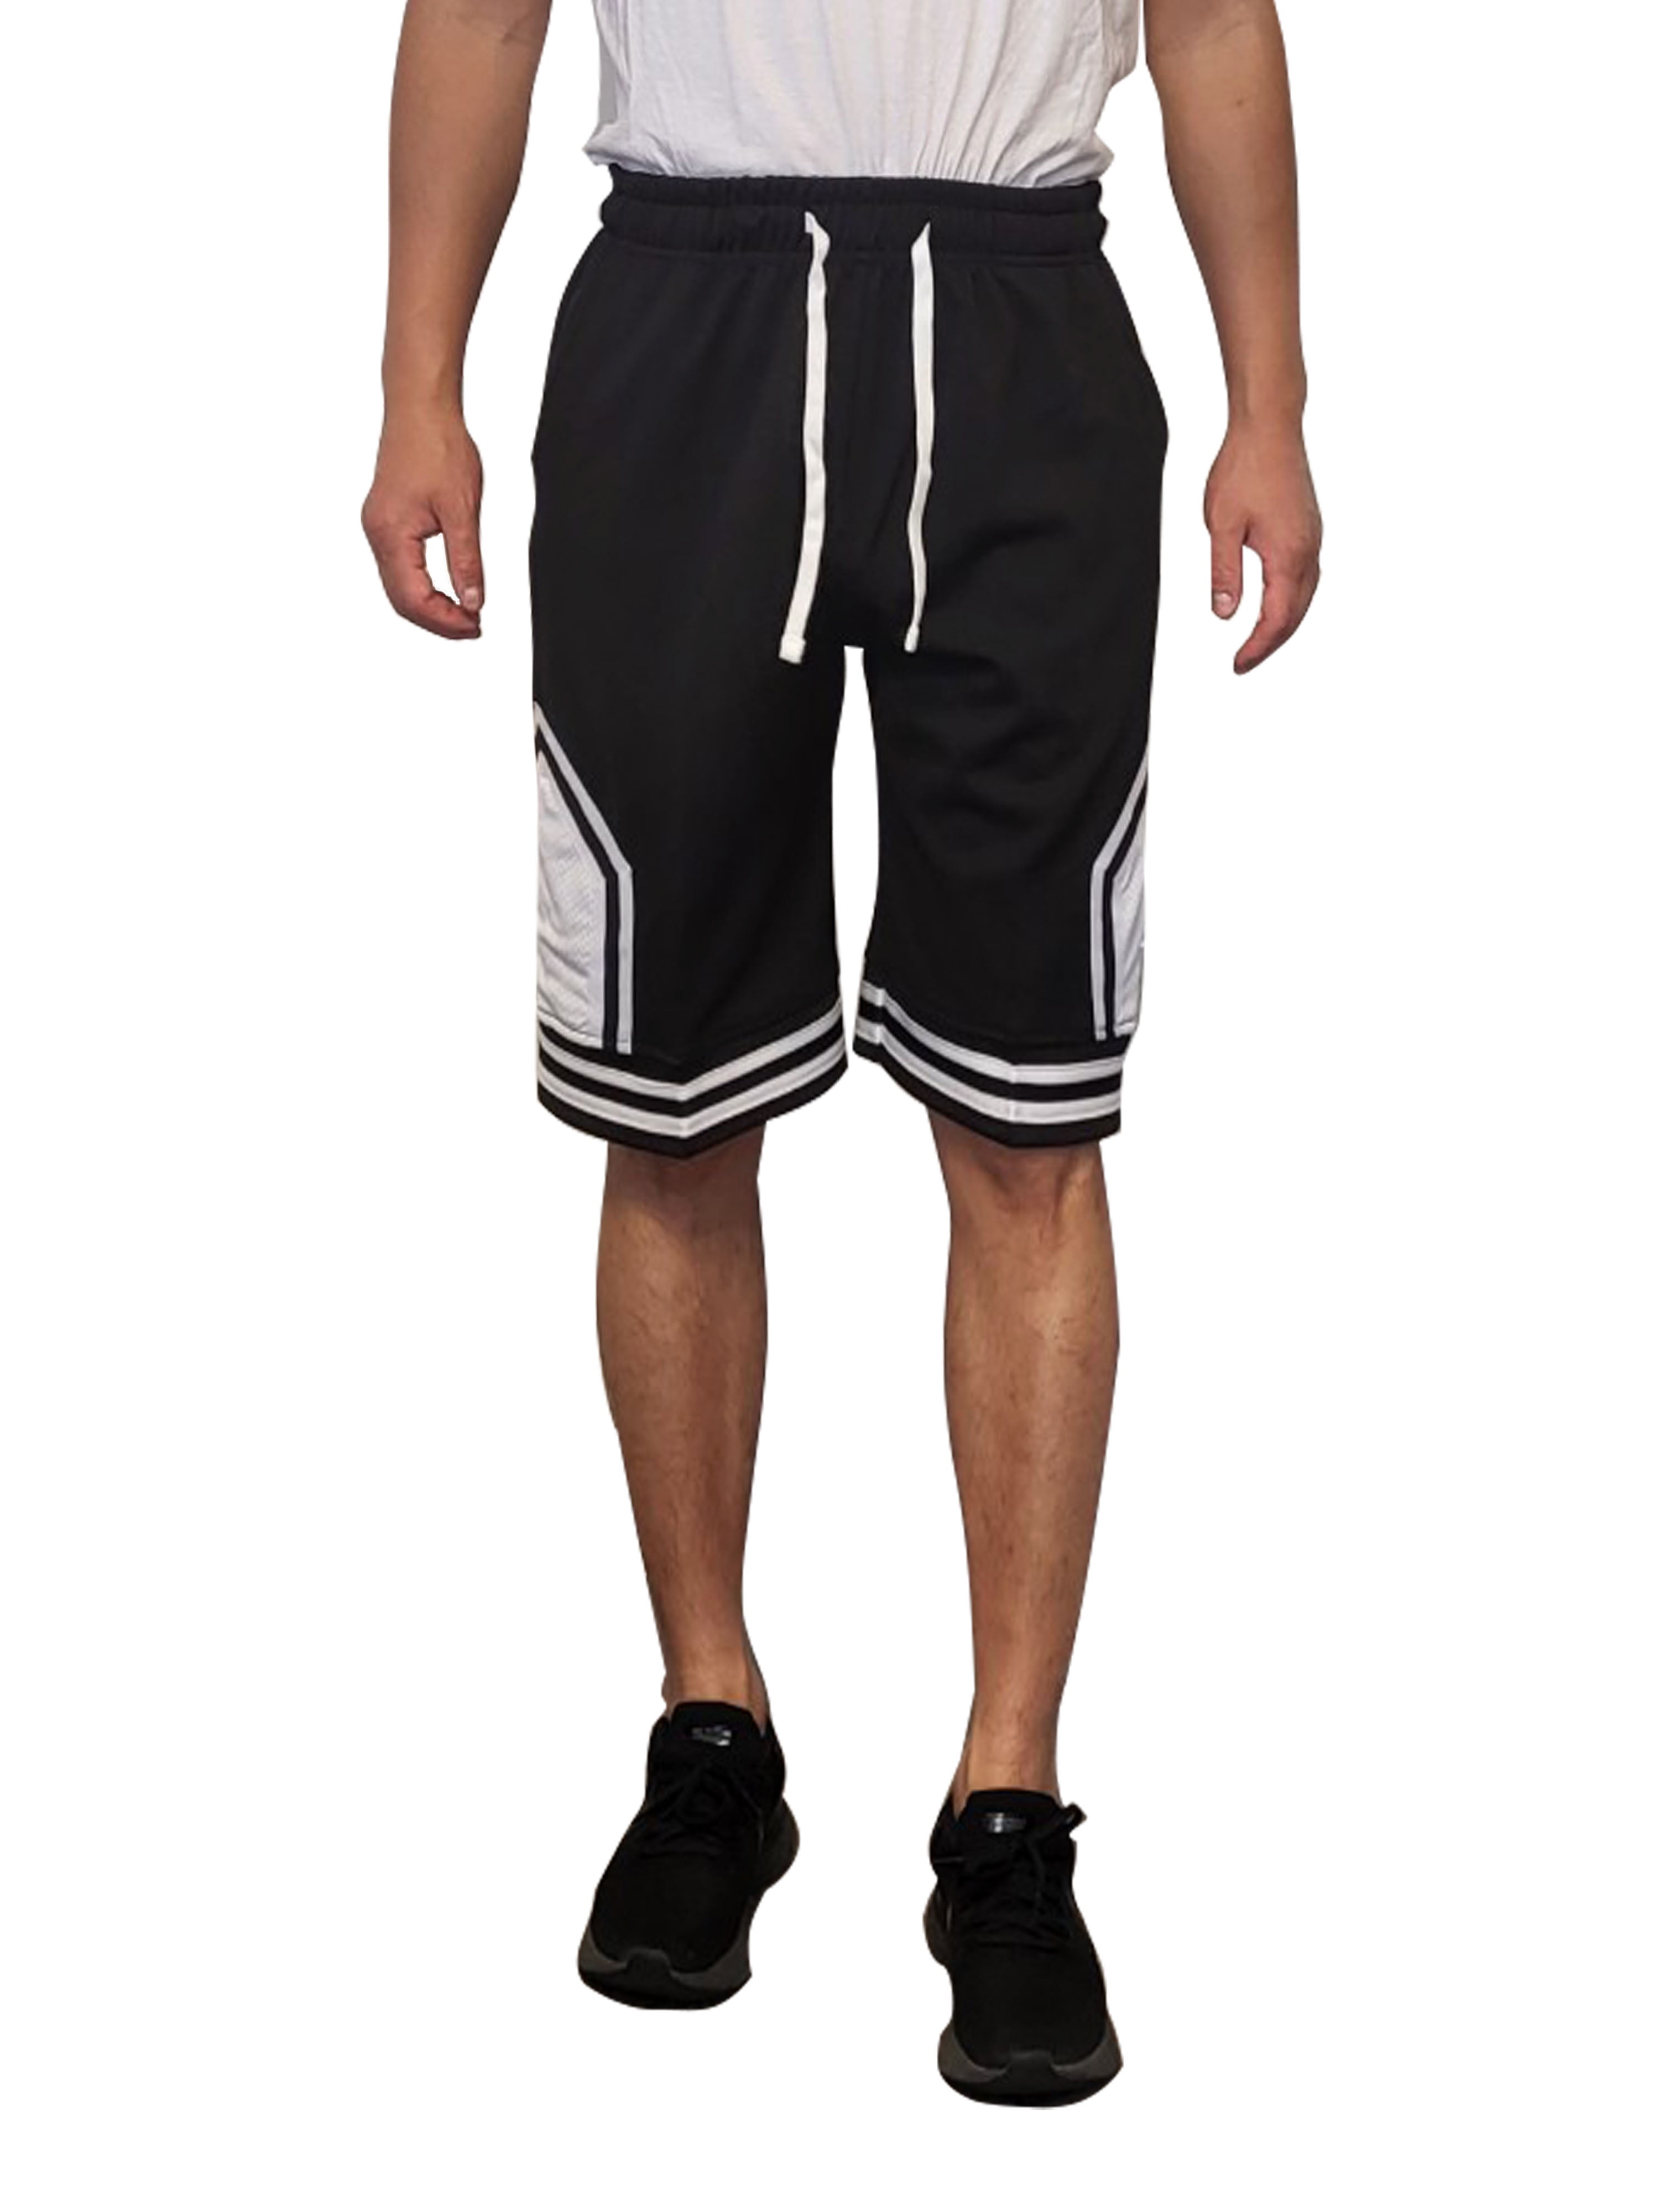 Lappel Men's Athlectic Basketball Shorts with Pockets Active Sportswear ...